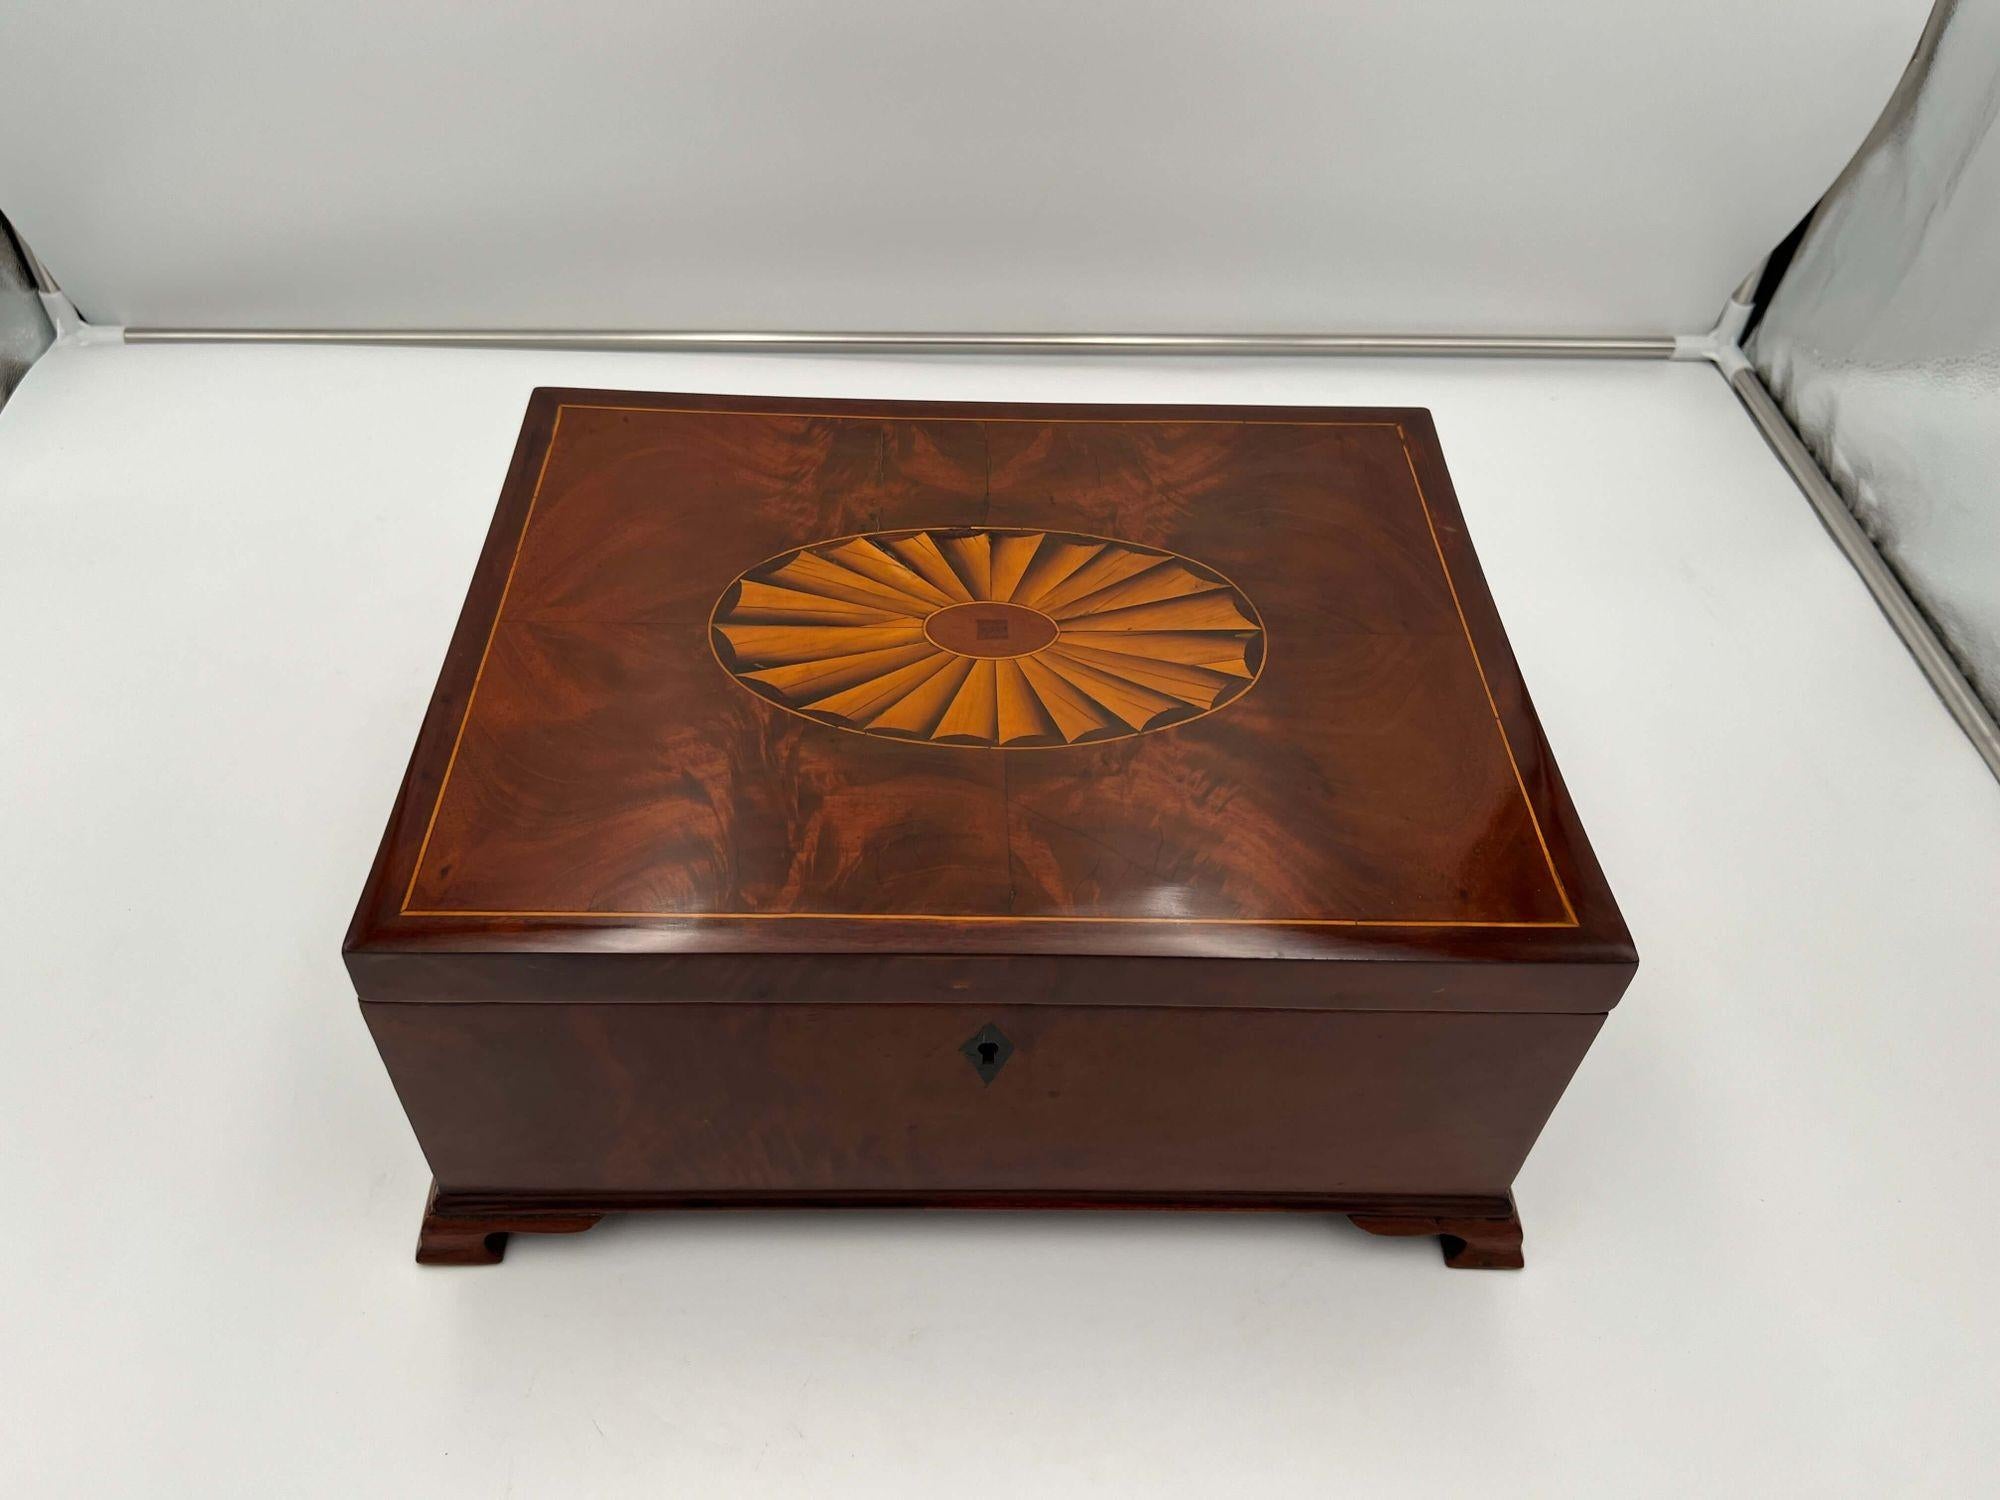 Large early Victorian box, Mahogany on oak, England circa 1840
 
Large body in mahogany veneered on oak. In the lid with fan inlay work in maple. Standing on 4 carved feet. Inside with 1 brass scissors.
Restored and hand polished with shellac.
